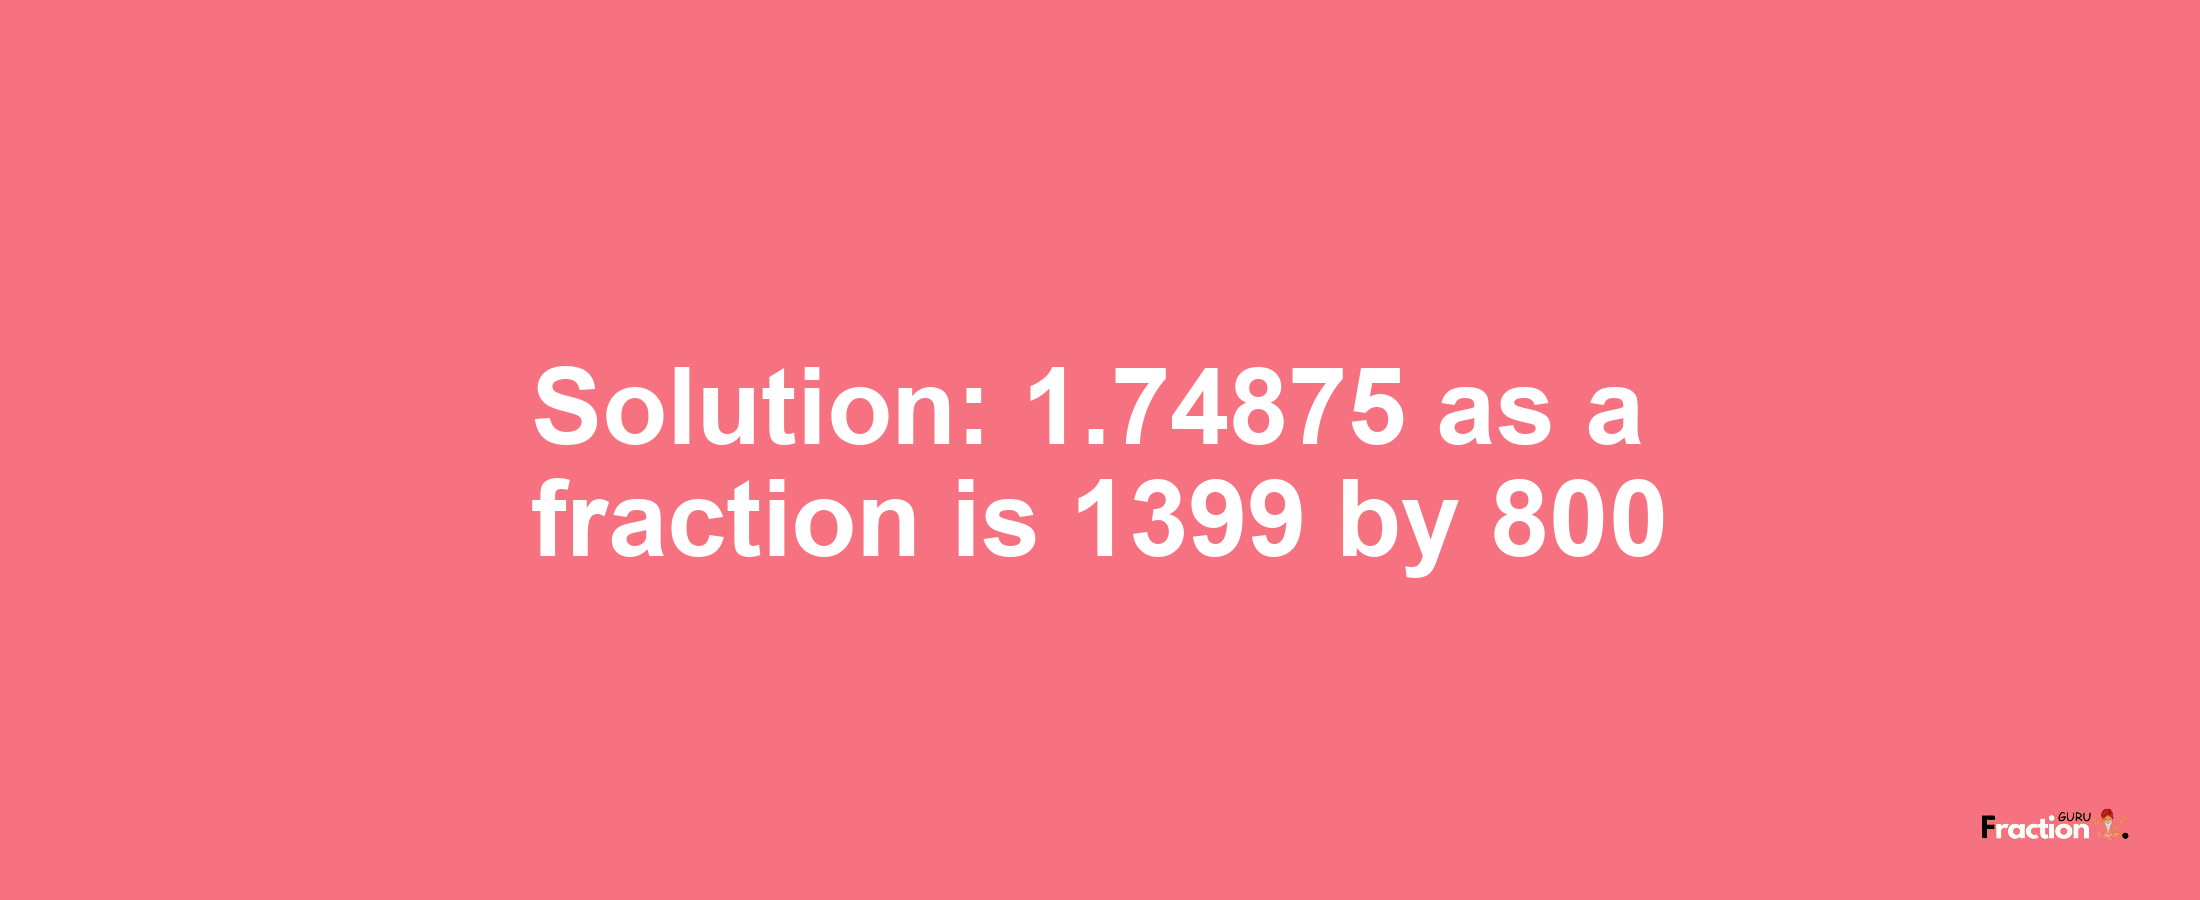 Solution:1.74875 as a fraction is 1399/800